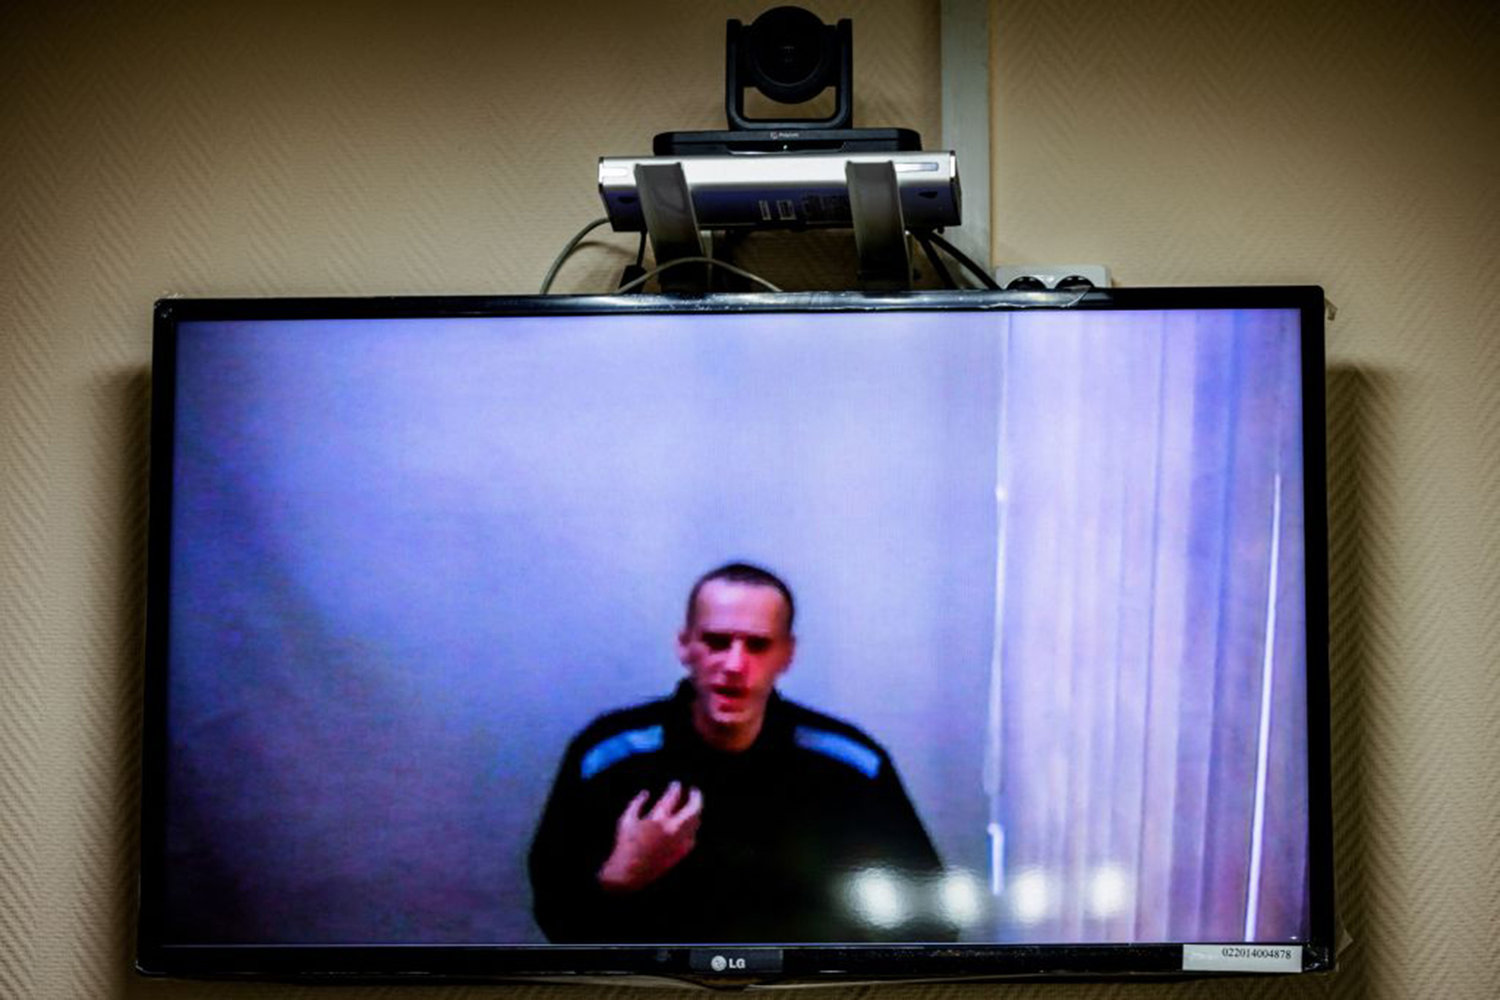 Jailed Kremlin critic Alexei Navalny appears on screen via a video link from prison during a court hearing, at a court in the town of Petushki some 120 kilometres outside Moscow, on May 26, 2021. (Dimitar Dilkoff/AFP via Getty Images/TNS)